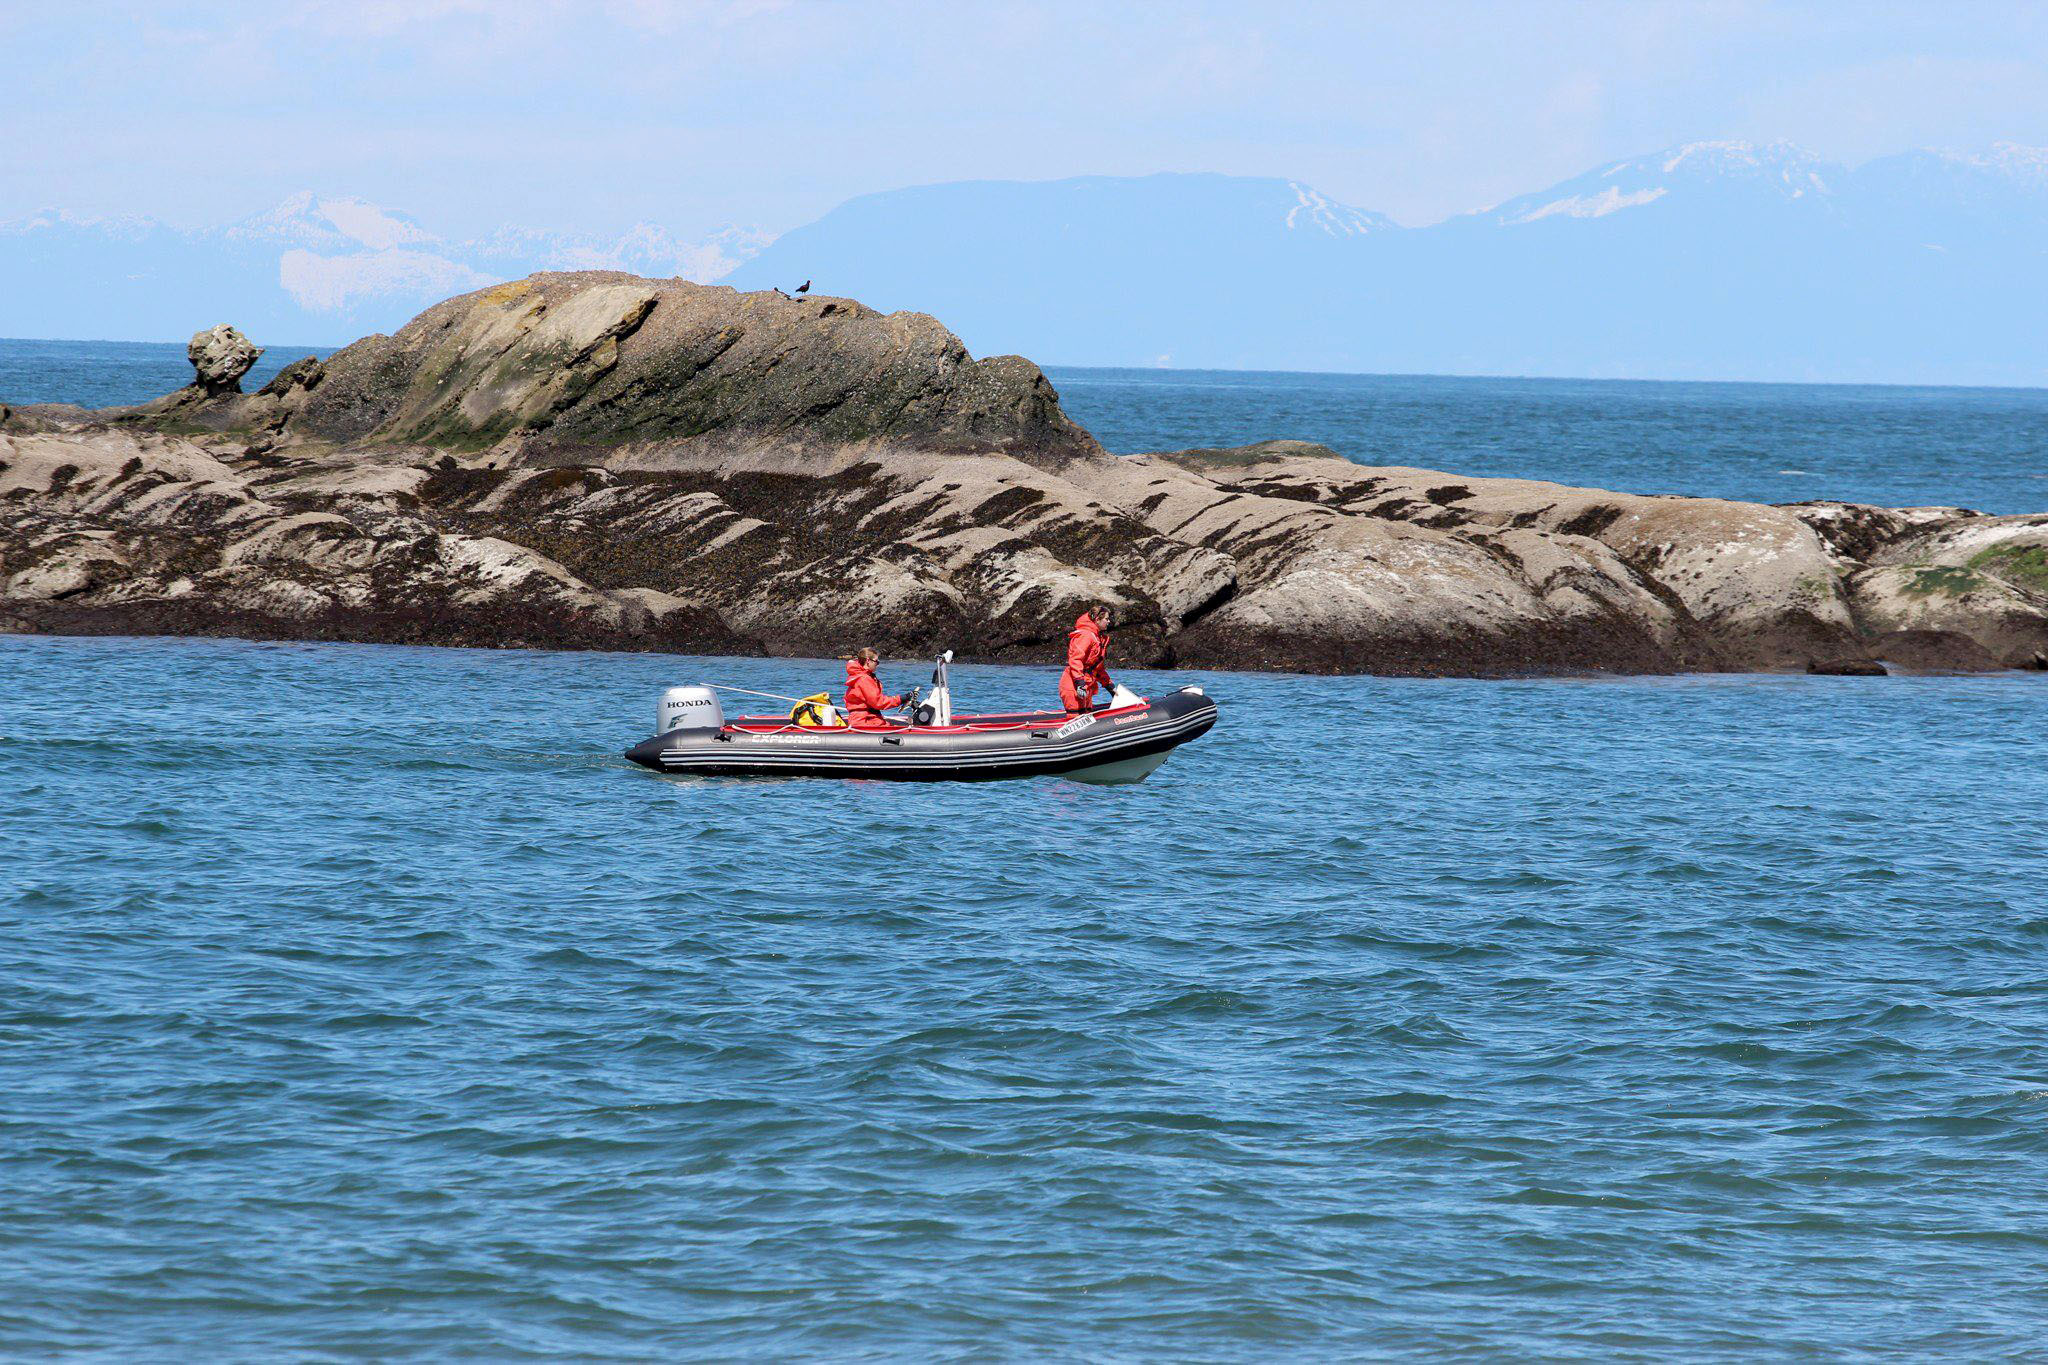 Two people in orange attire drving a boat past a rocky island.